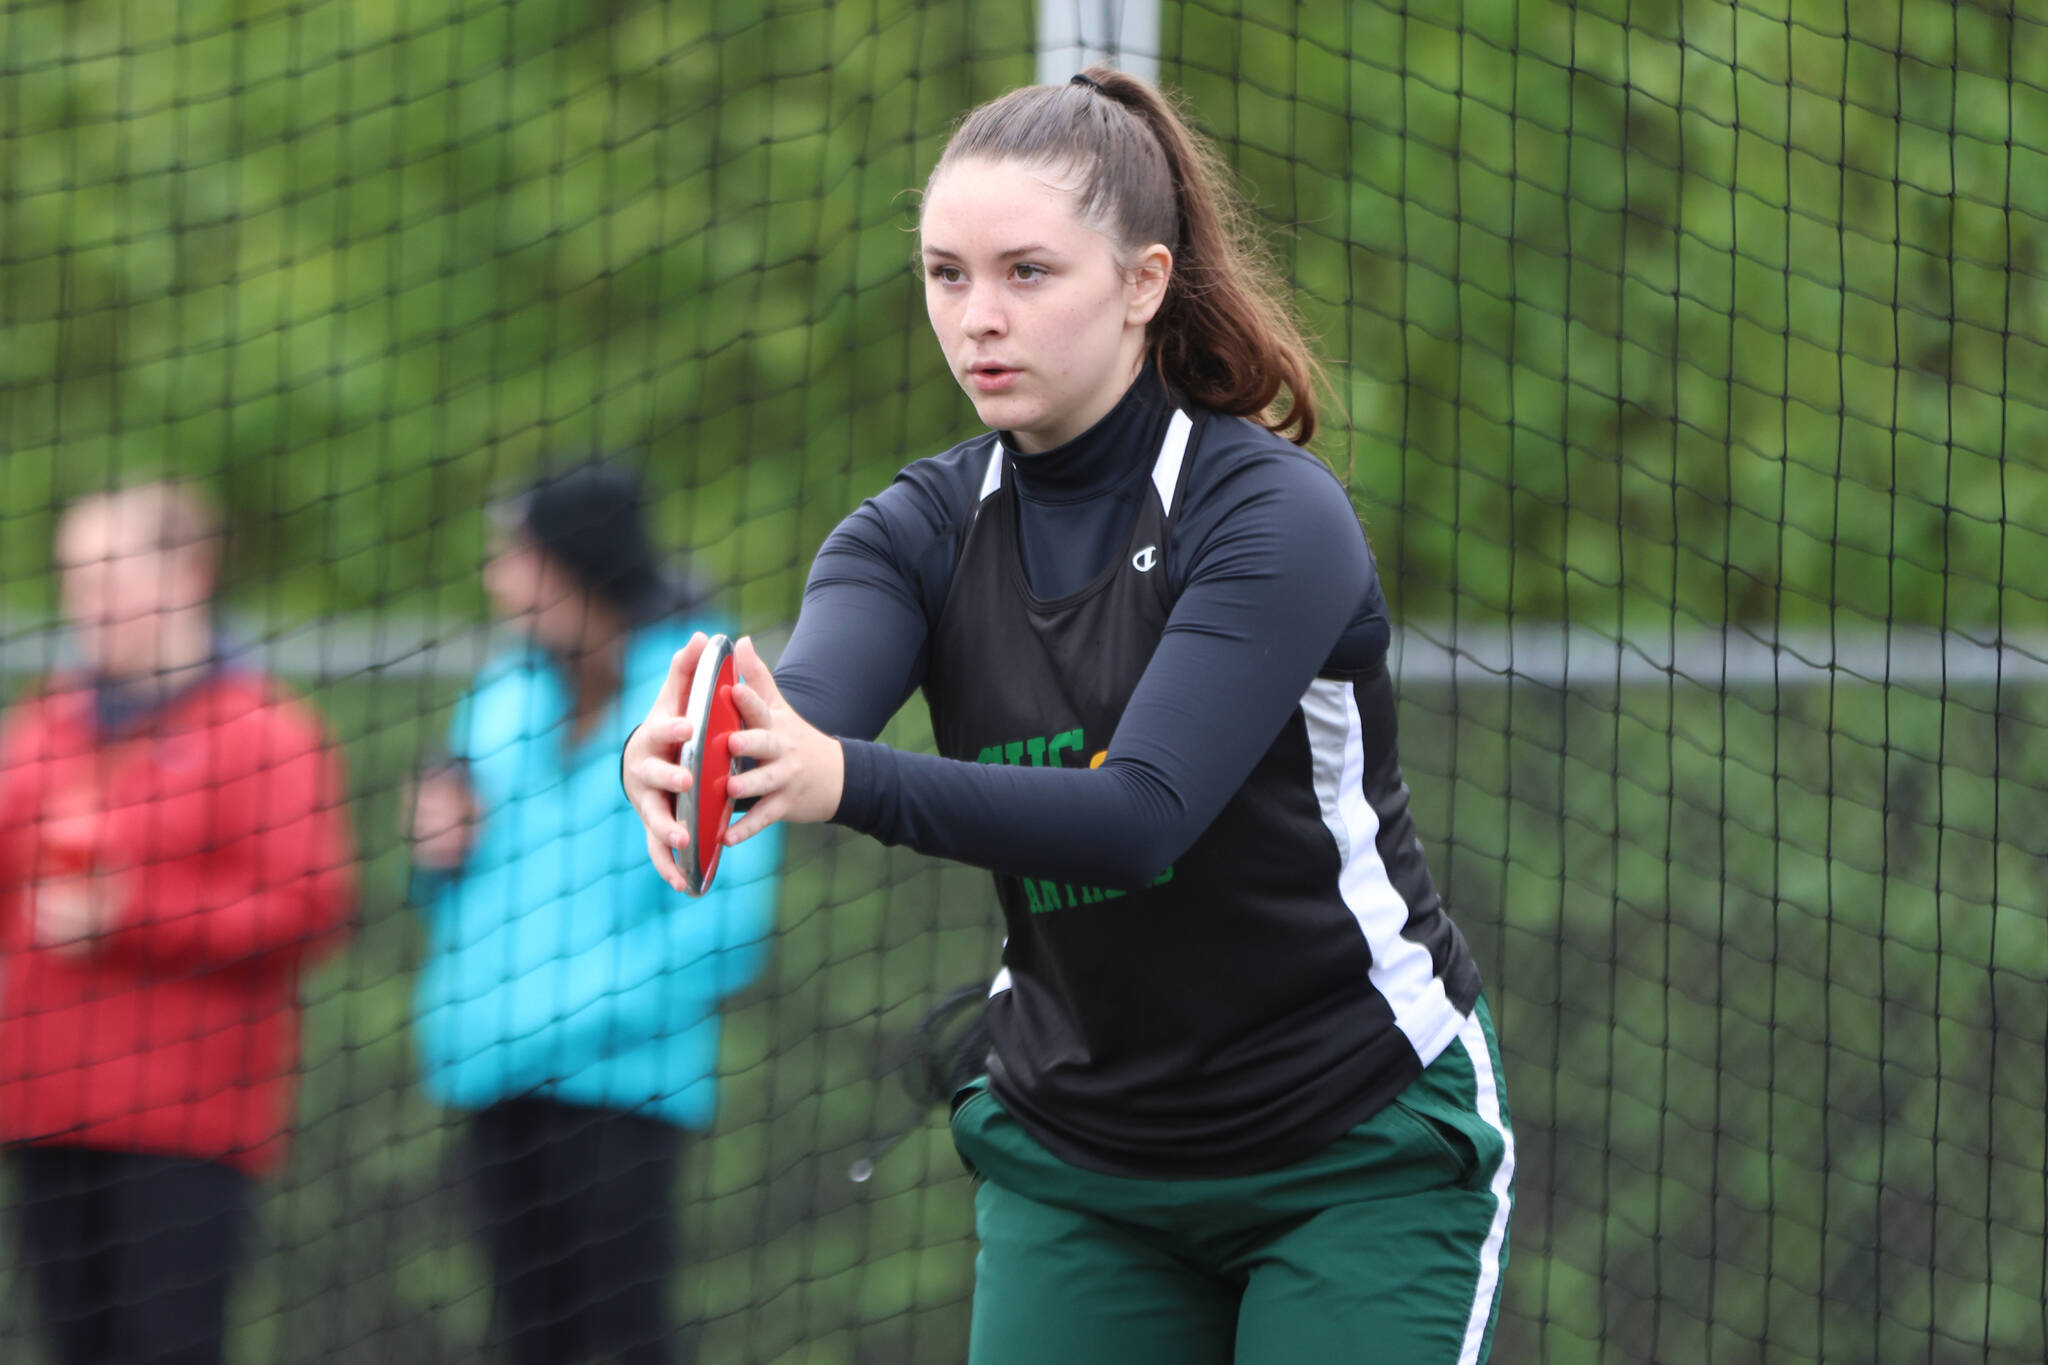 Alissa Durgan, a Craig High School senior, gets ready to give the discus a throw Saturday morning at Thunder Mountain High School. Durgan set a personal record during the Region V meet held in Juneau with a throw of 64 feet and 7 inches. (Ben Hohenstatt / Juneau Empire)